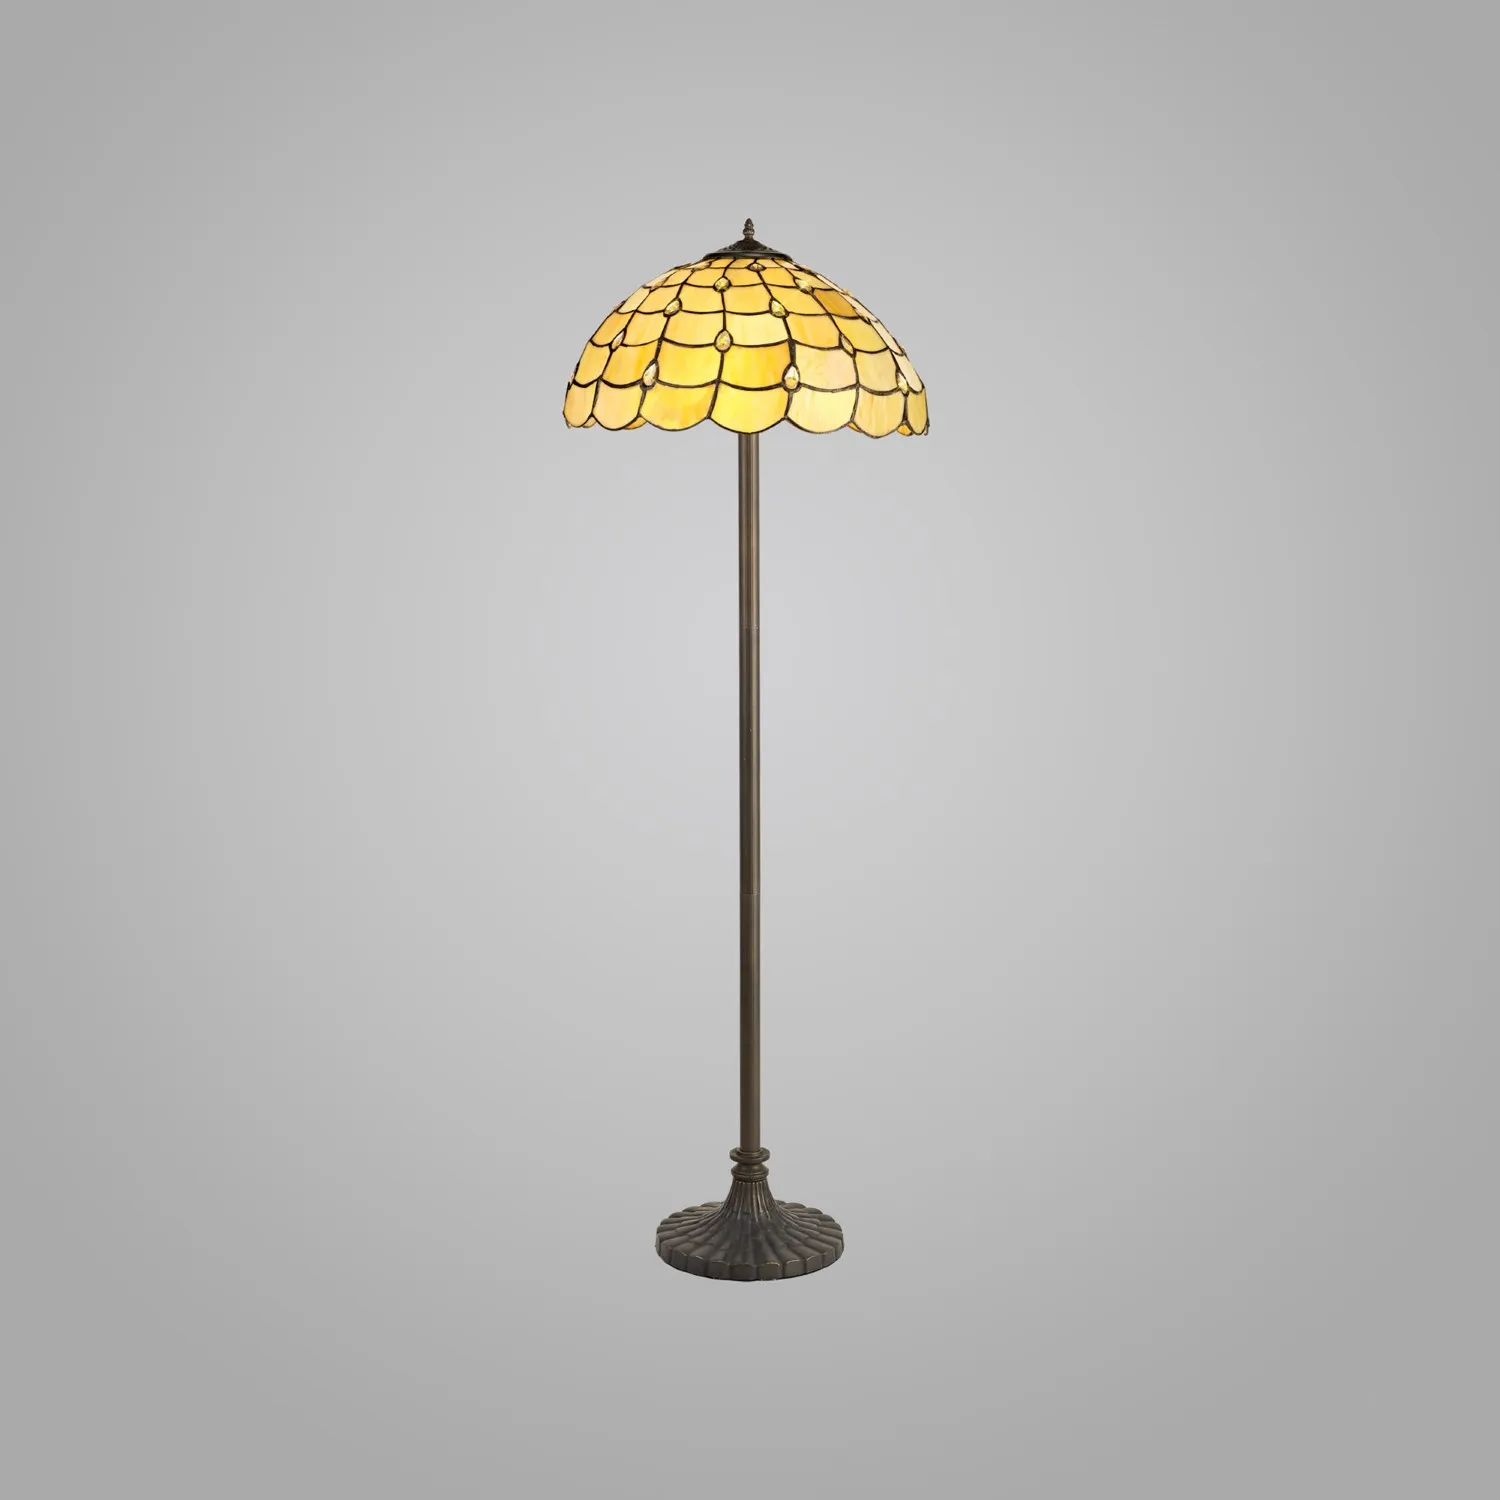 Stratford 2 Light Stepped Design Floor Lamp E27 With 40cm Tiffany Shade, Beige Clear Crystal Aged Antique Brass